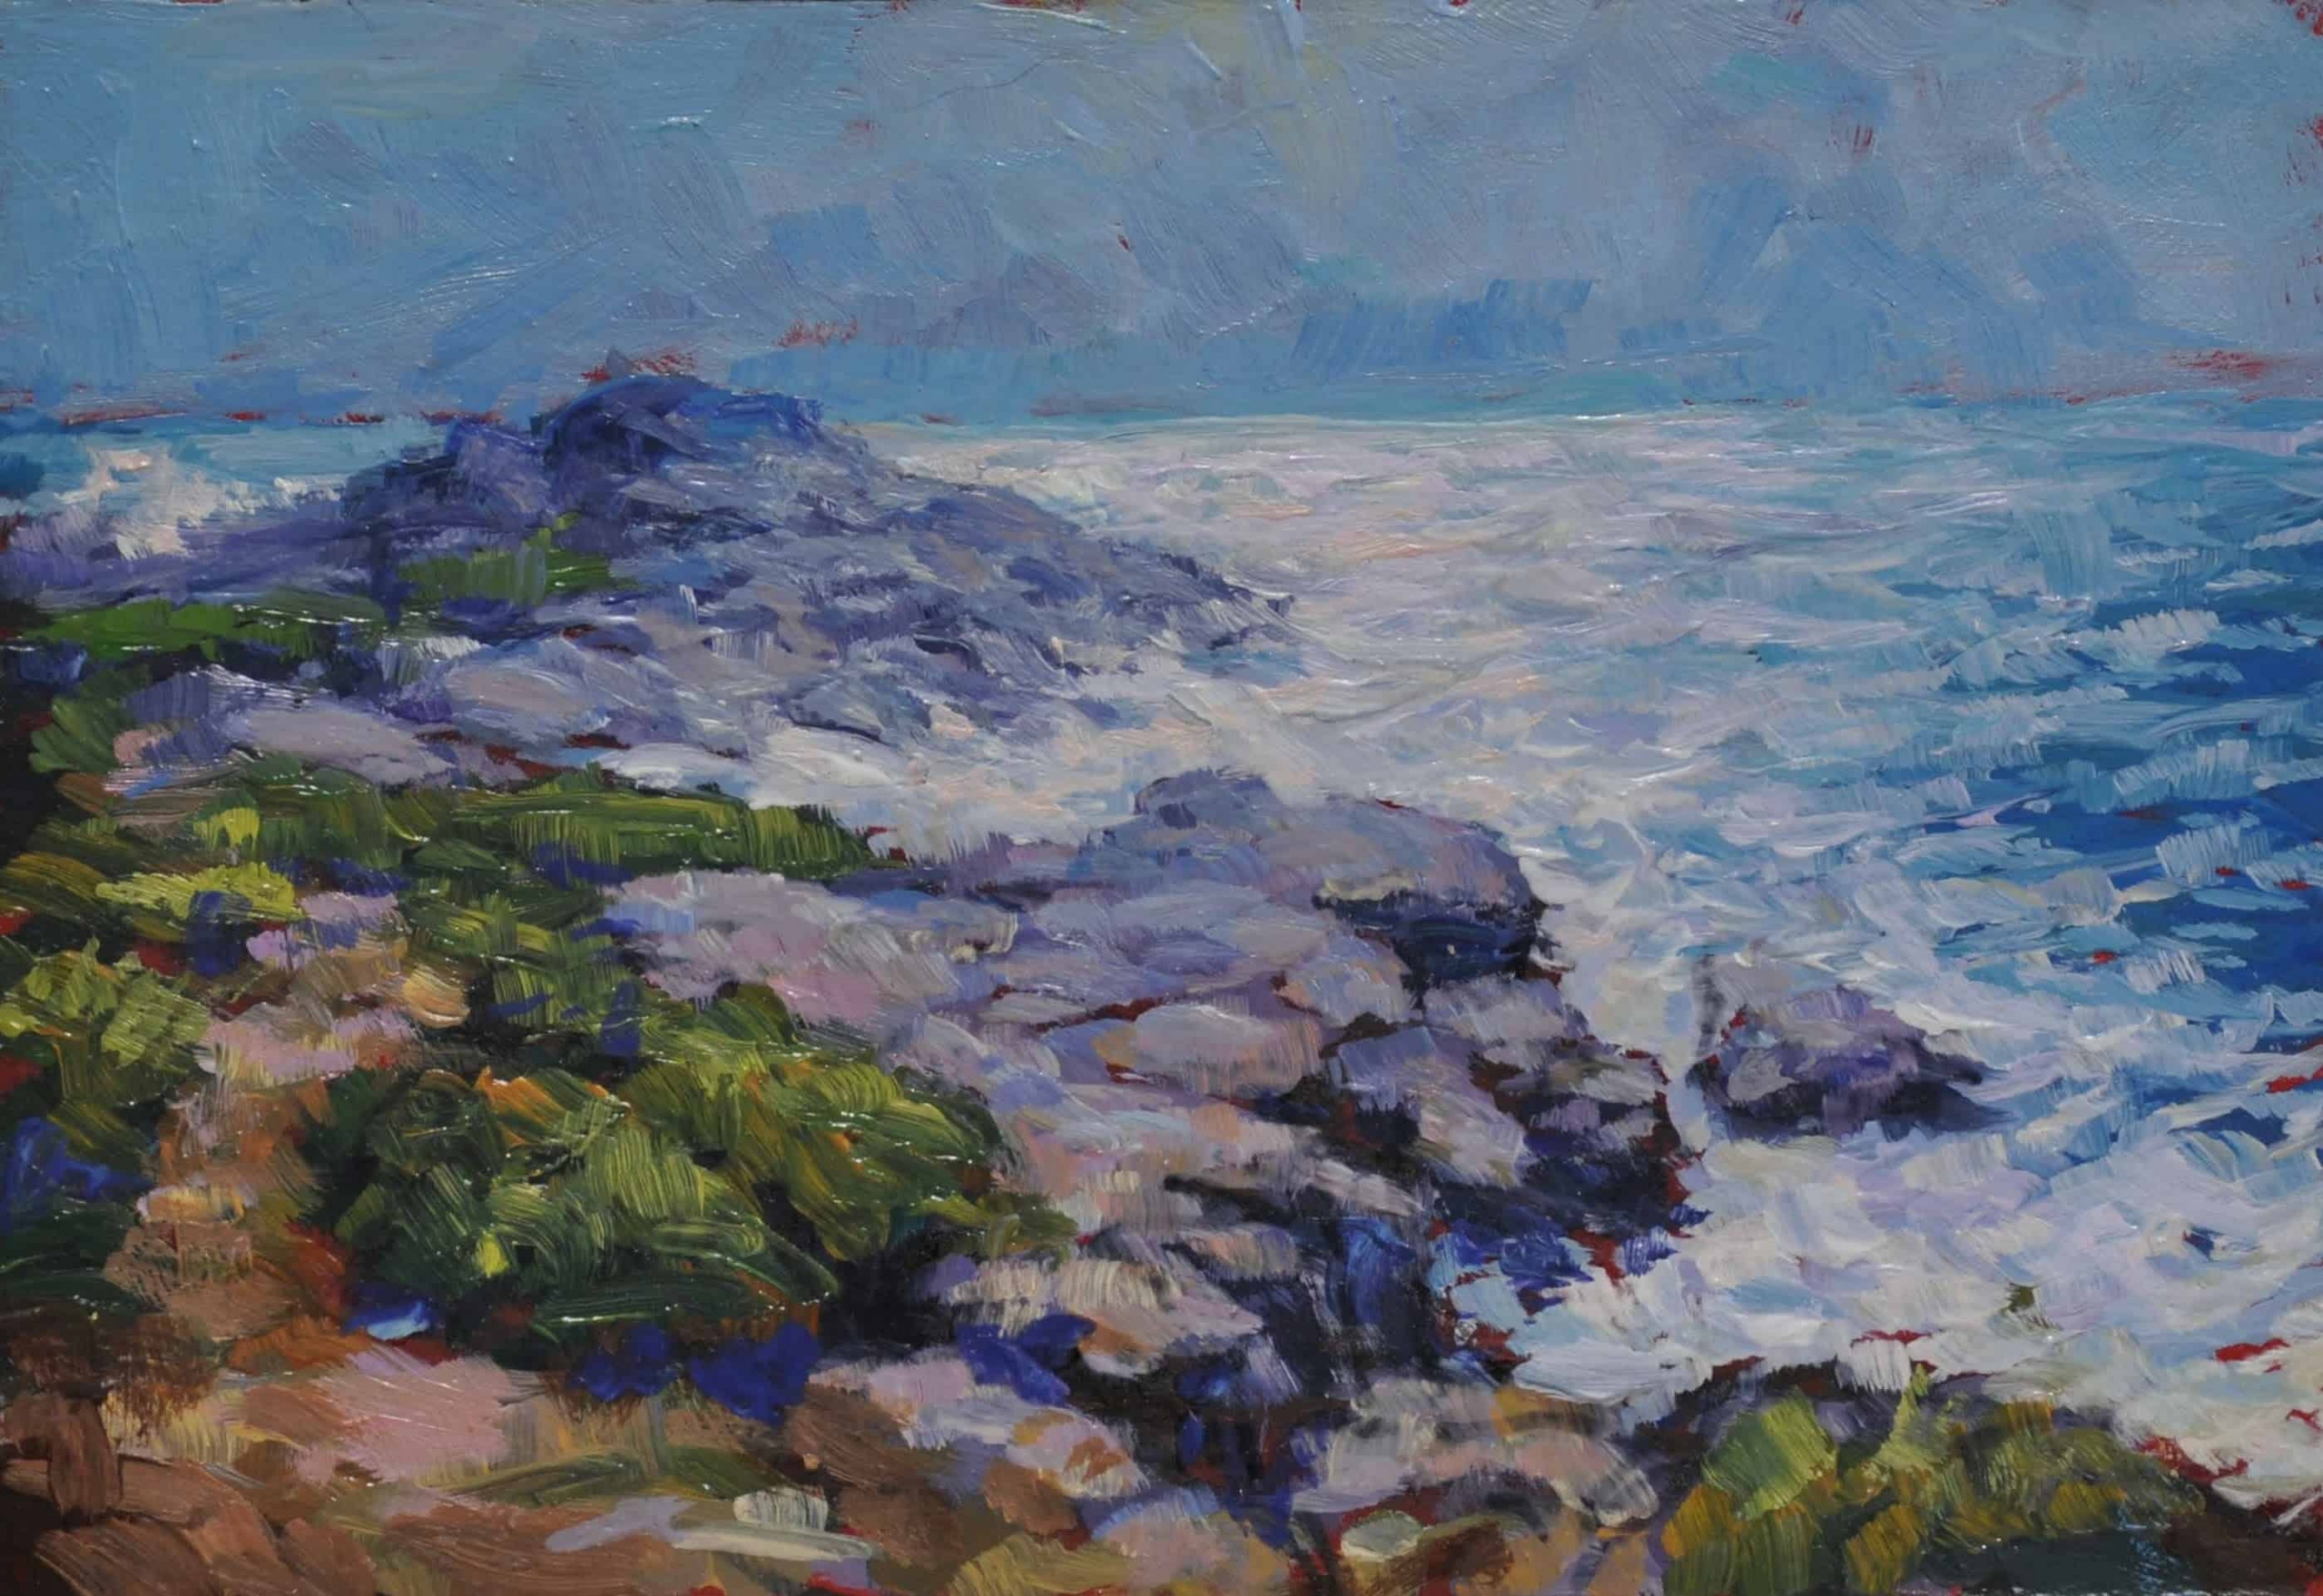 Kim Aerts oil painting - Head of Shad Bay After the Hurricane- 3x5 inches